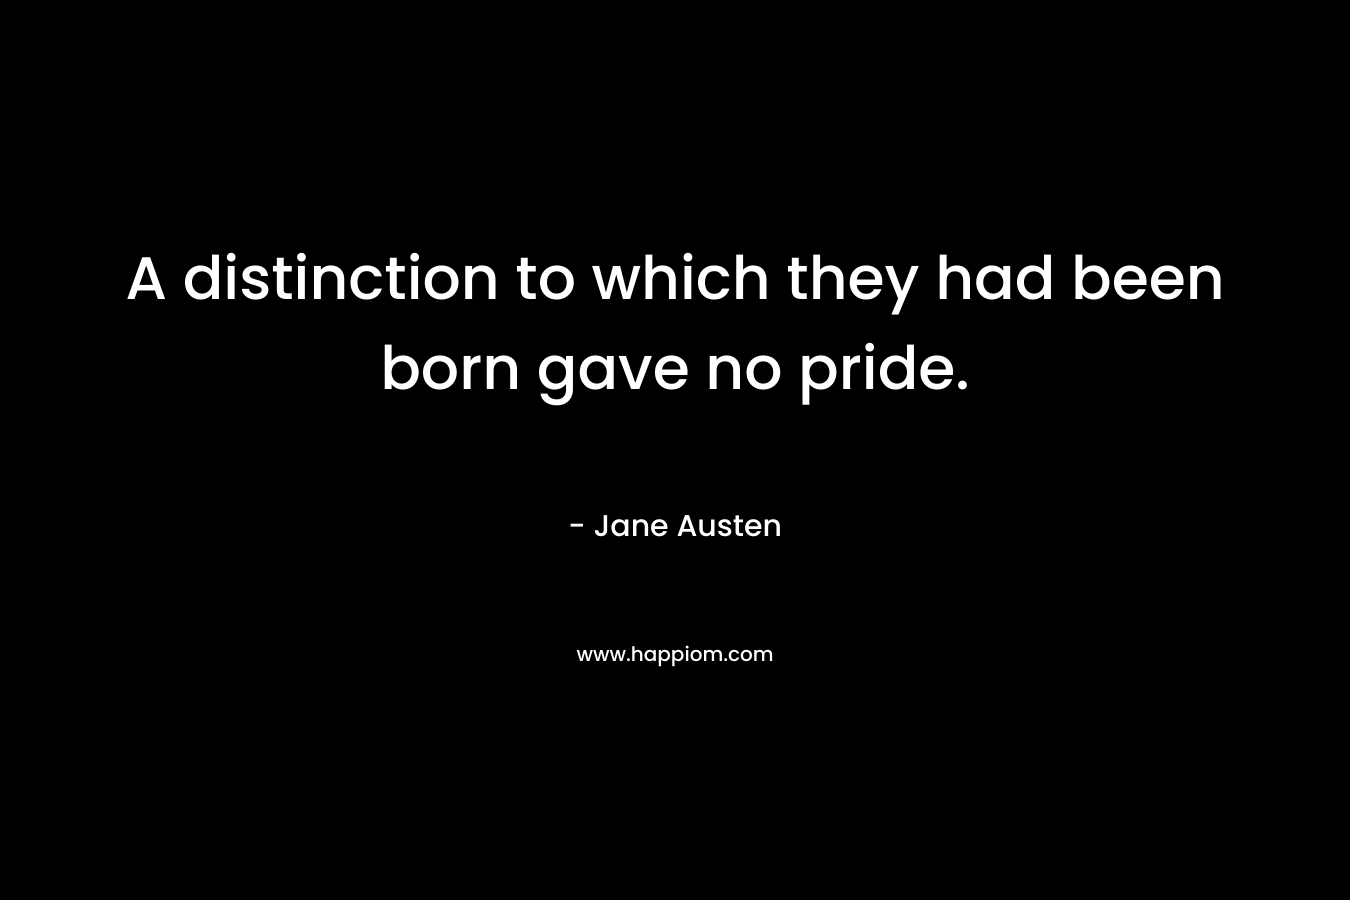 A distinction to which they had been born gave no pride. – Jane Austen